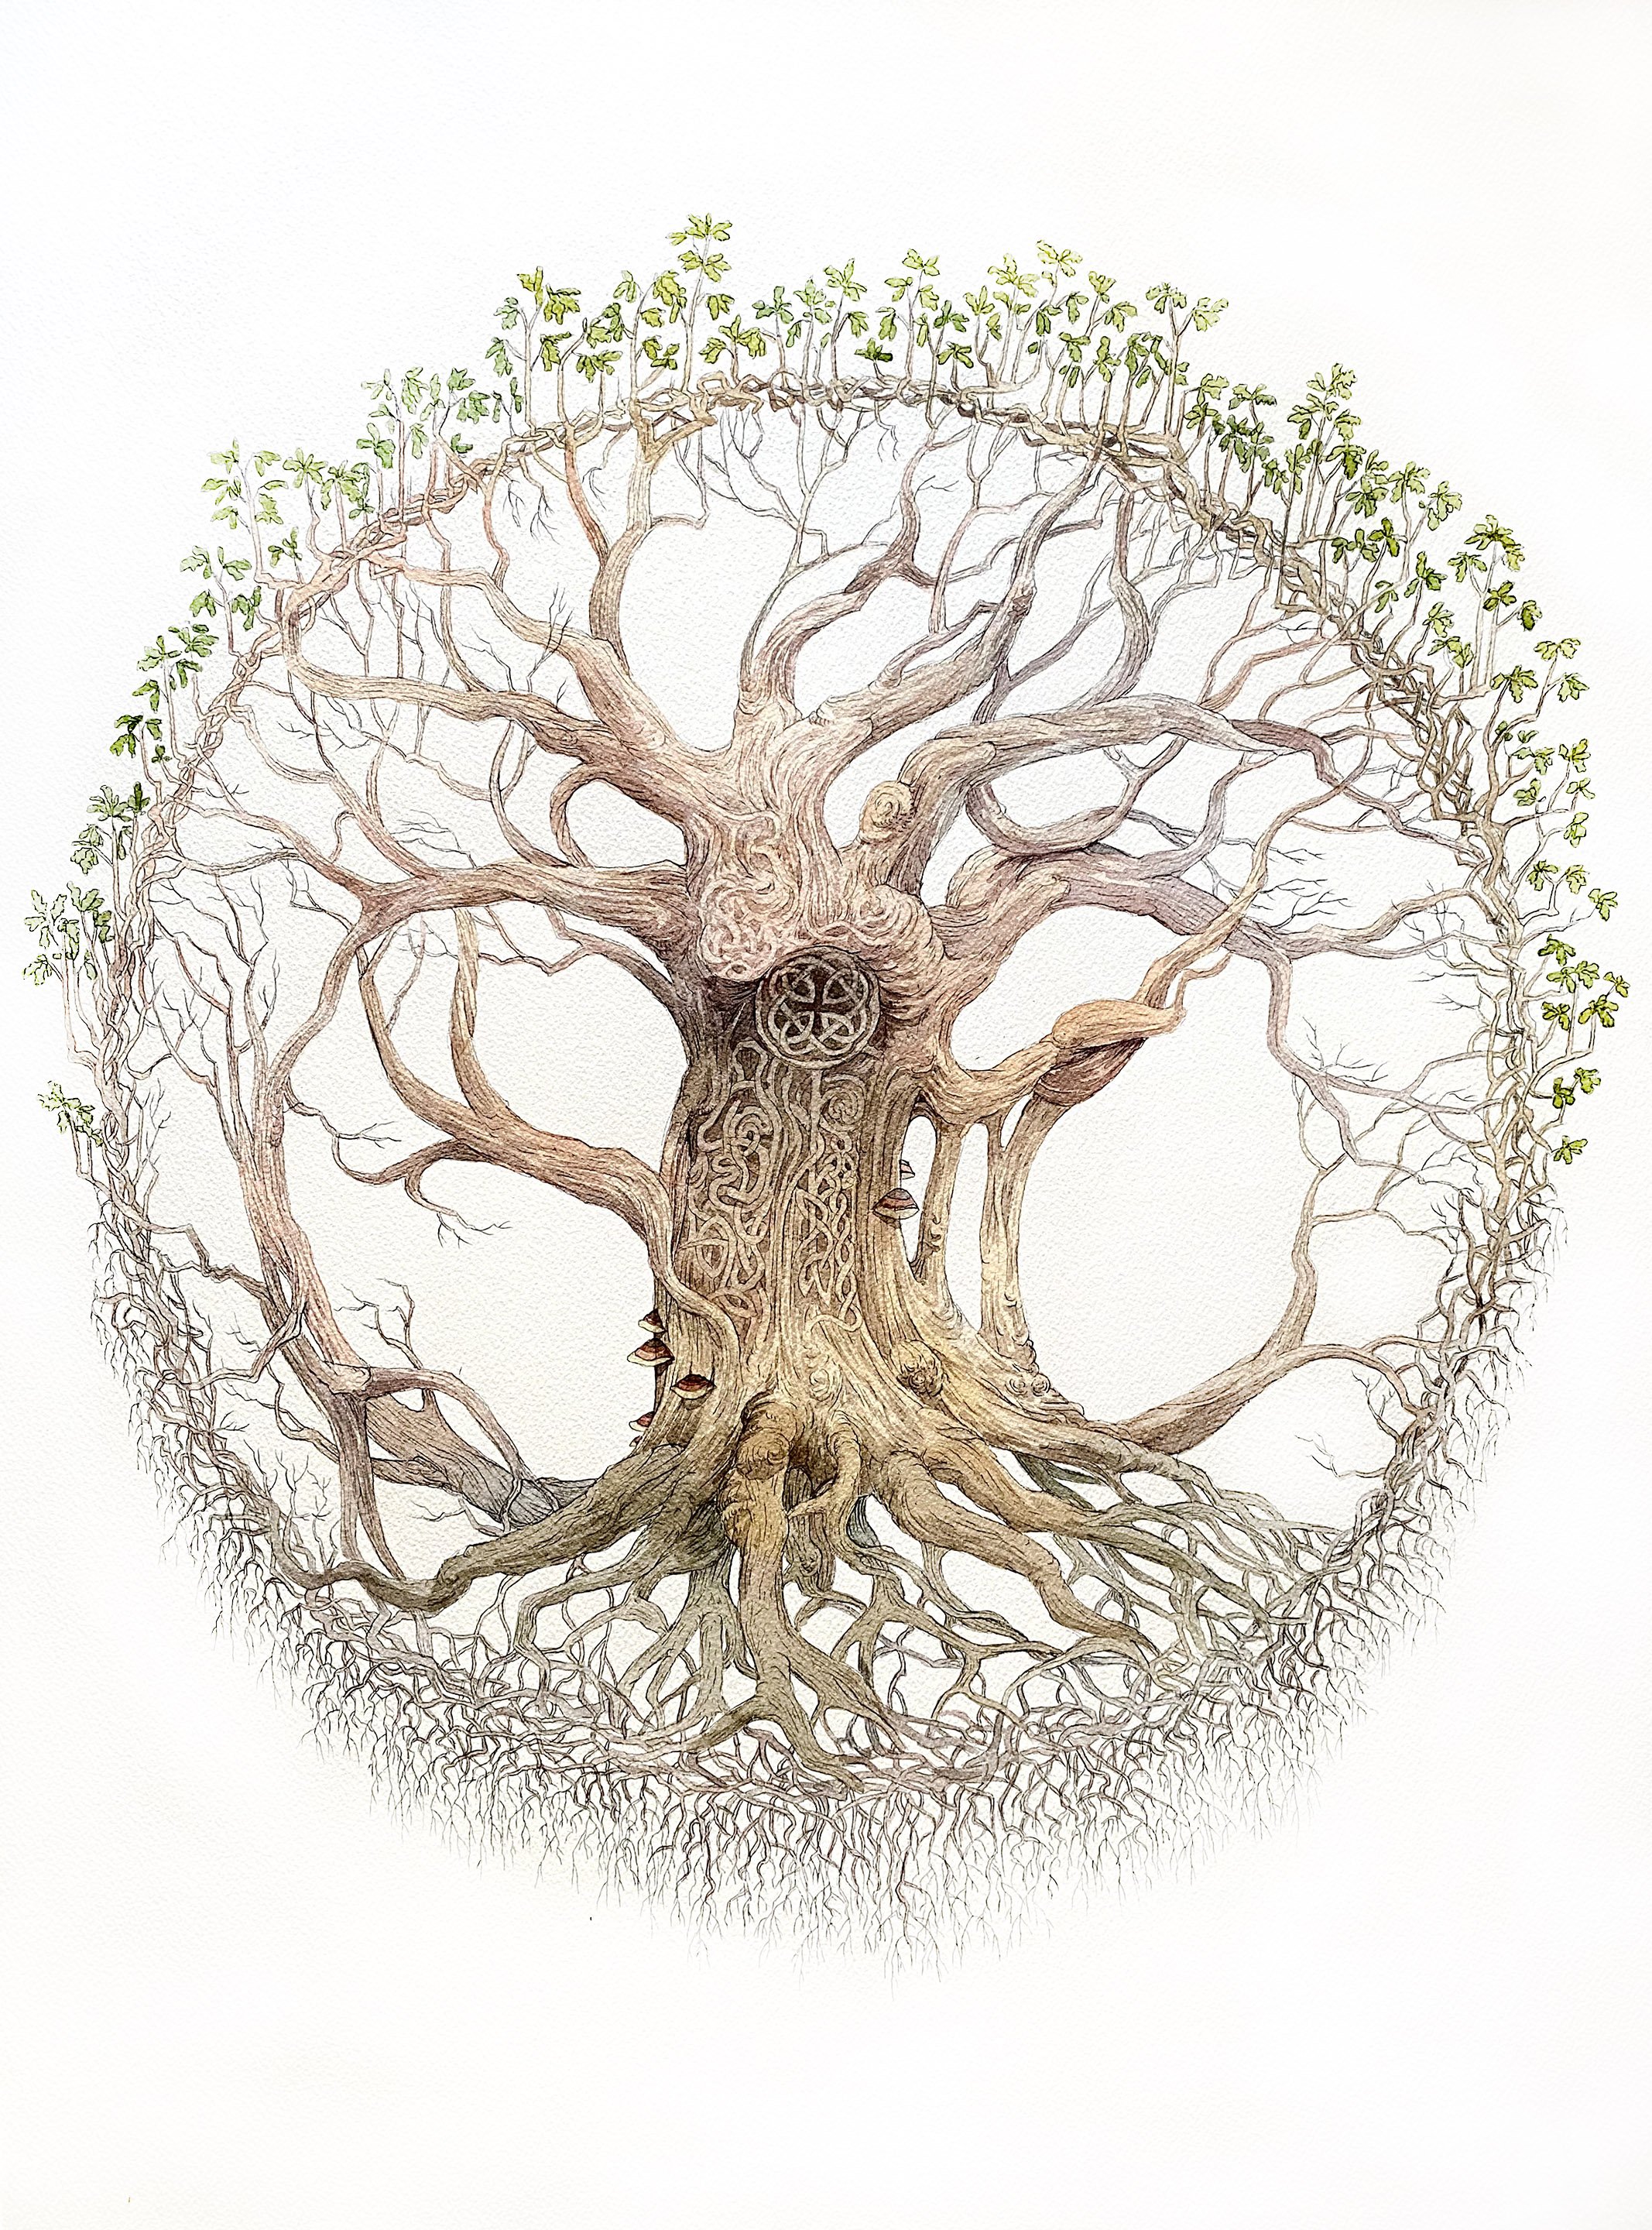    Yggdrasil    watercolor and graphite on paper  24” x 18”  2022  (sold) 